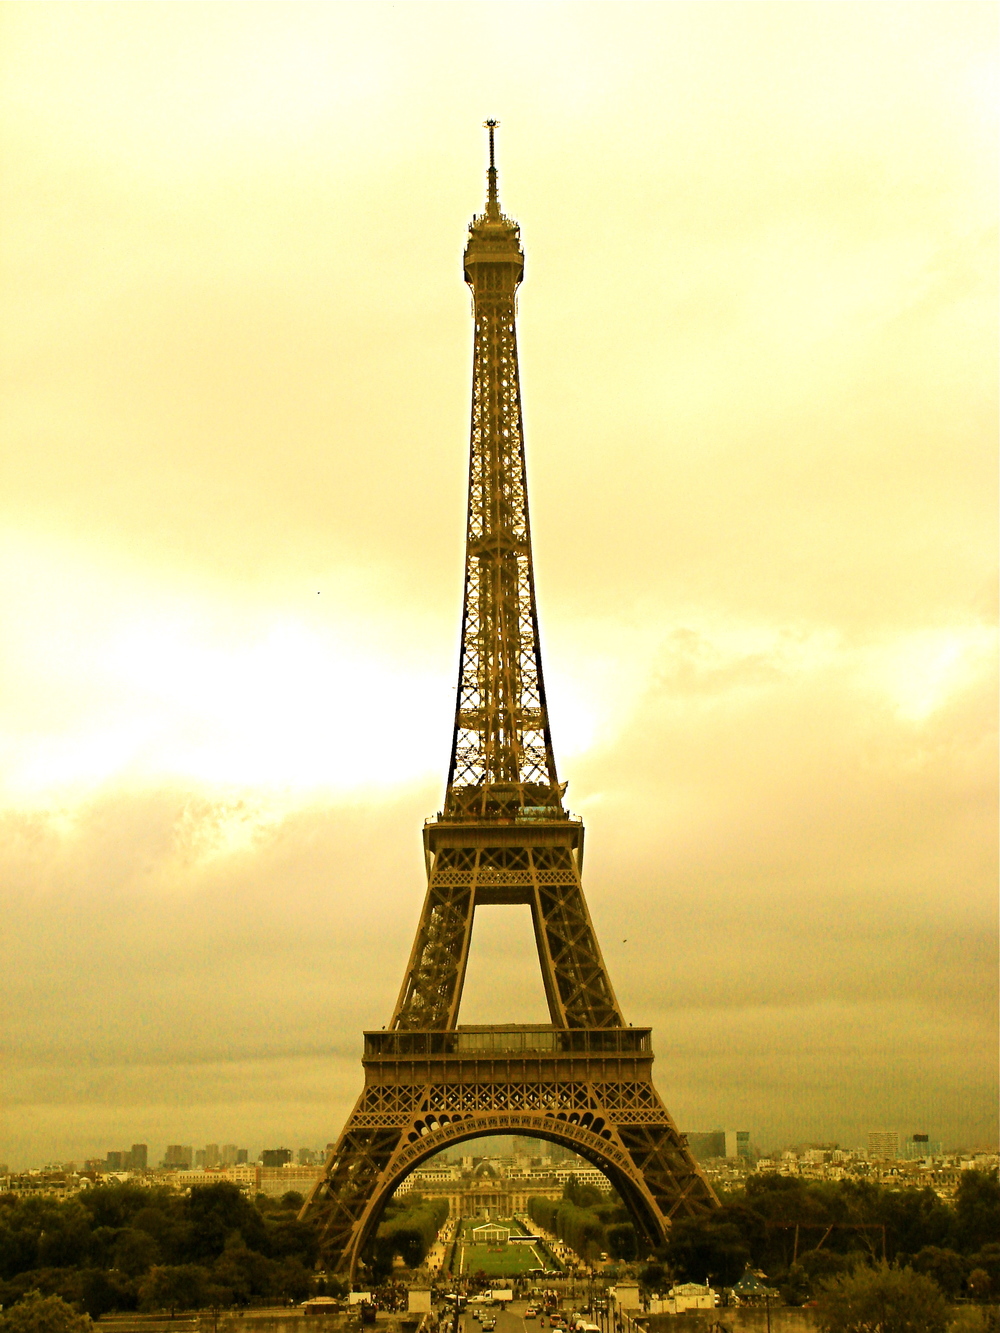 Art or Eyesore? The Eiffel Tower History You Probably Didn't Know — The